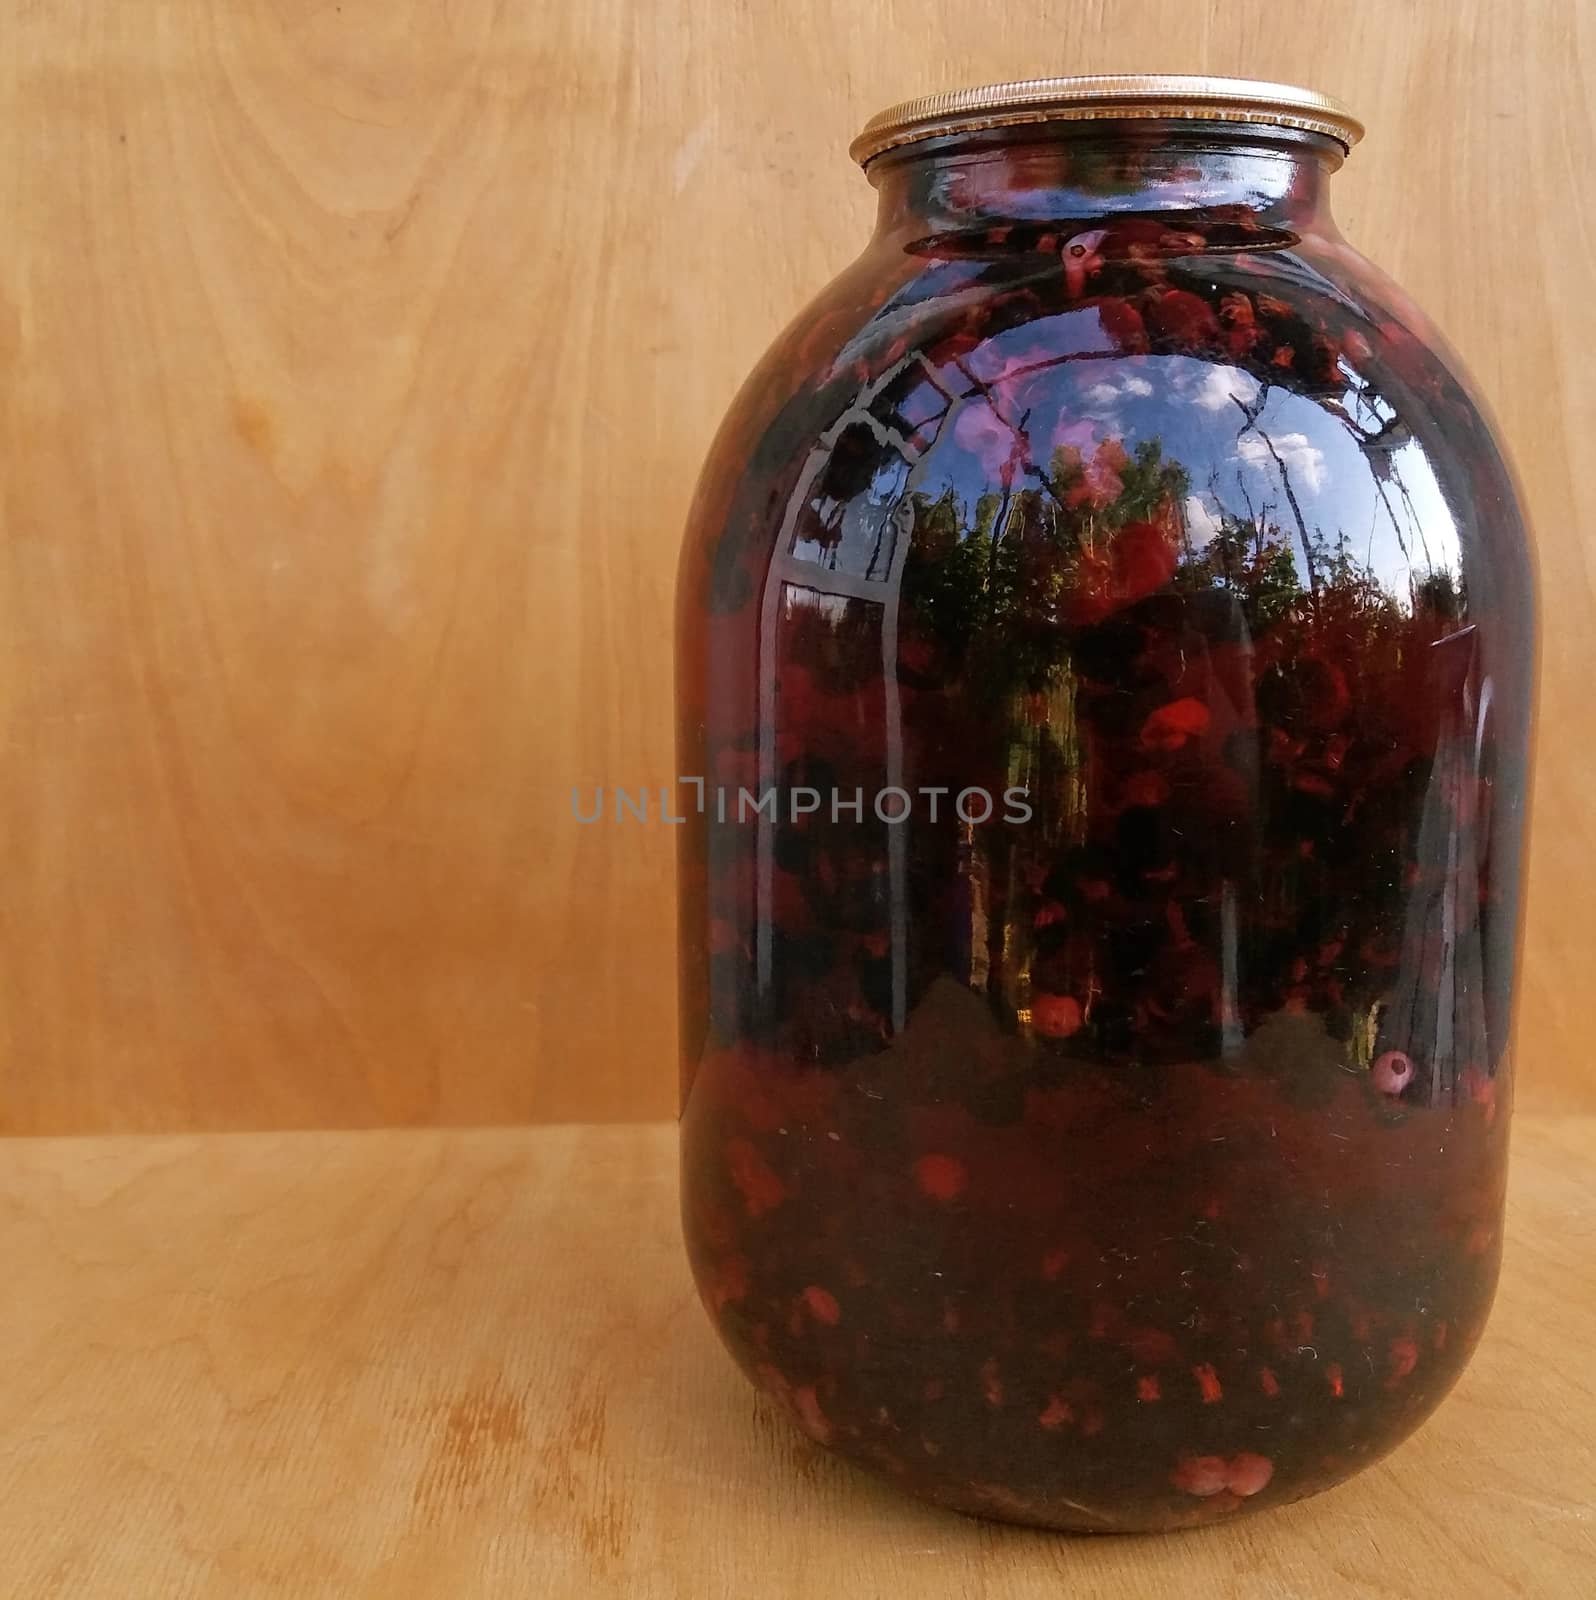 A jar of currant compote by Mindru